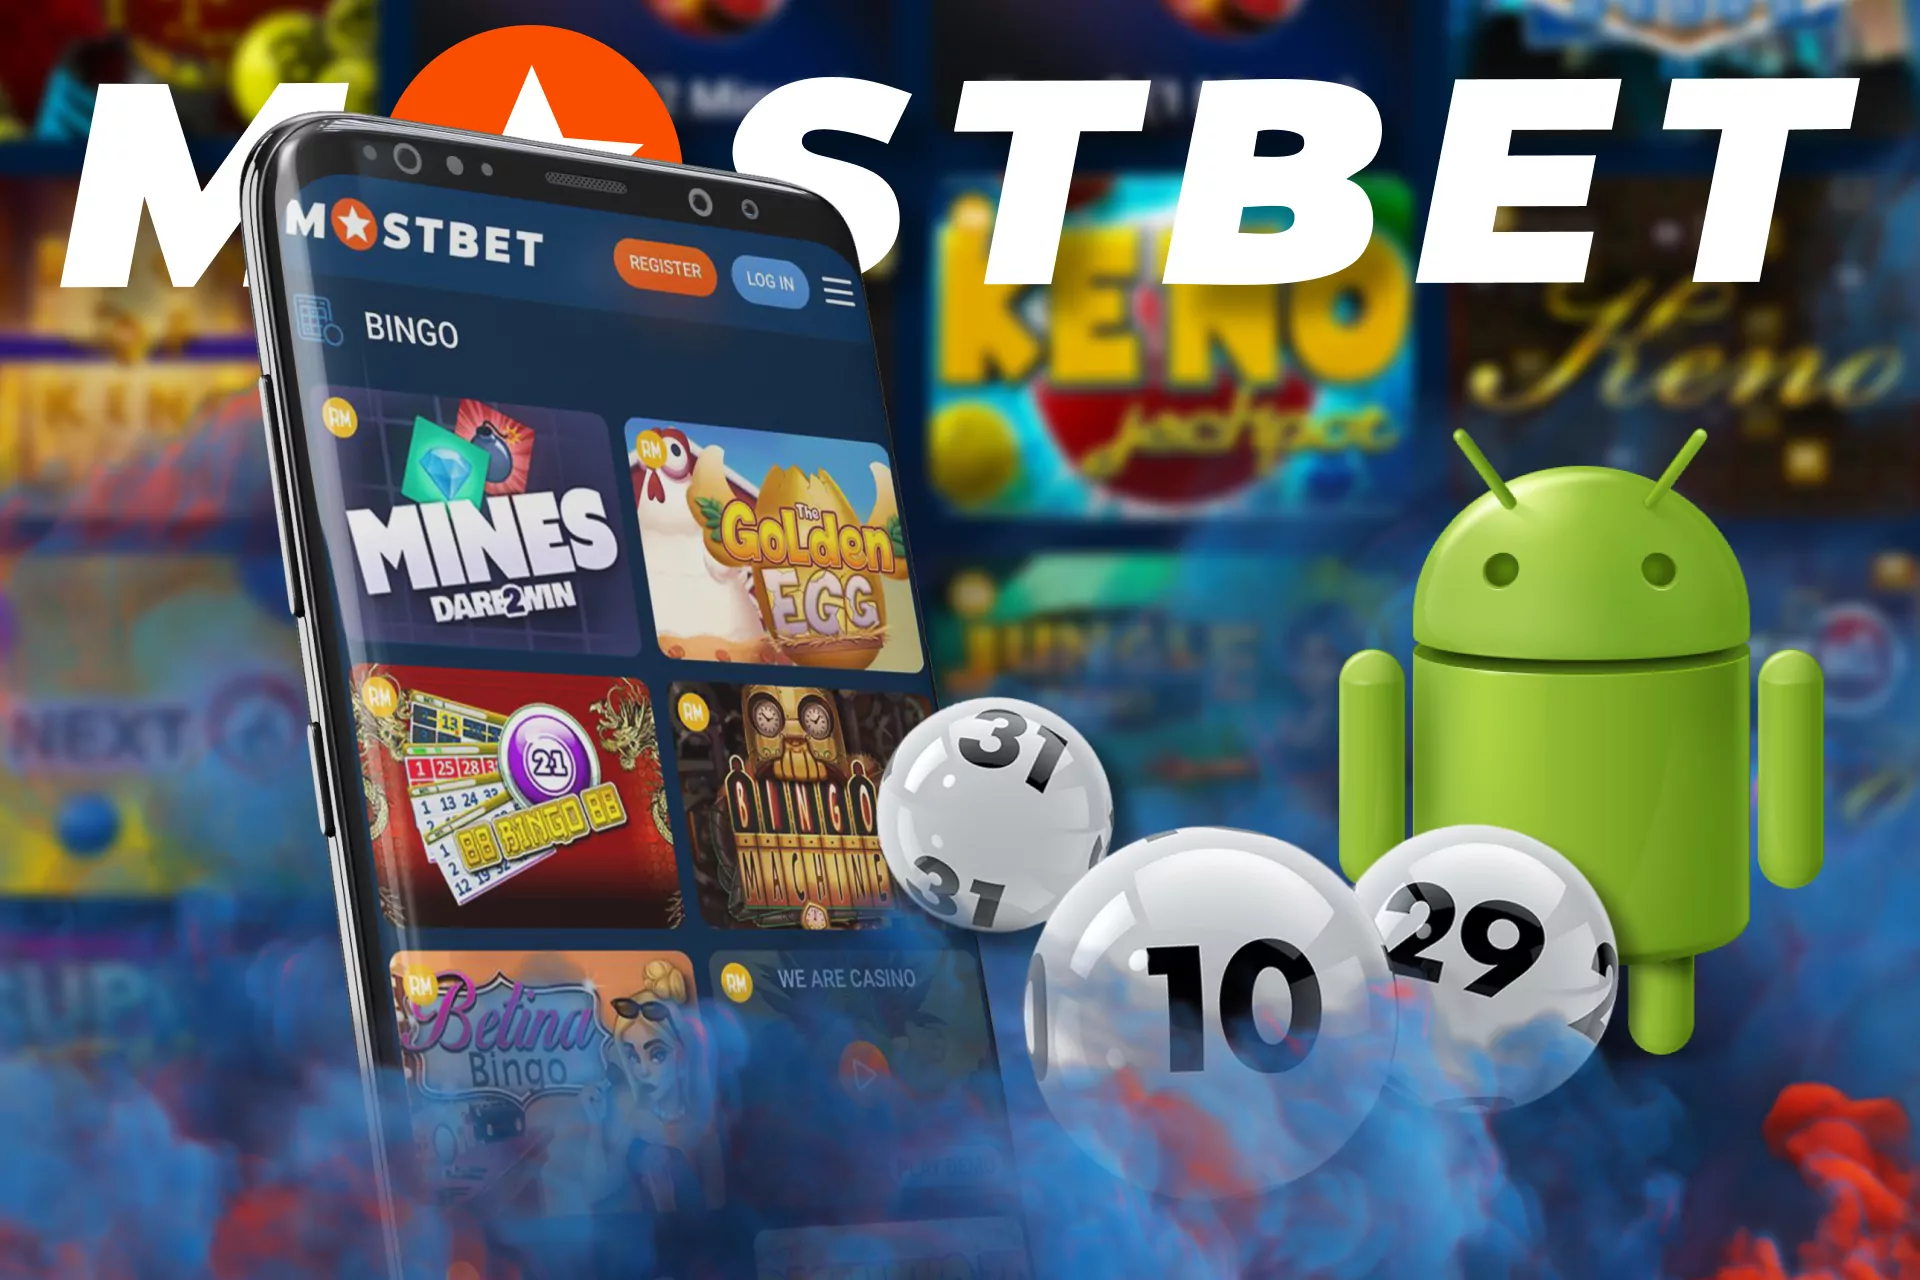 Play lotteries with Mostbet on your Android phone.